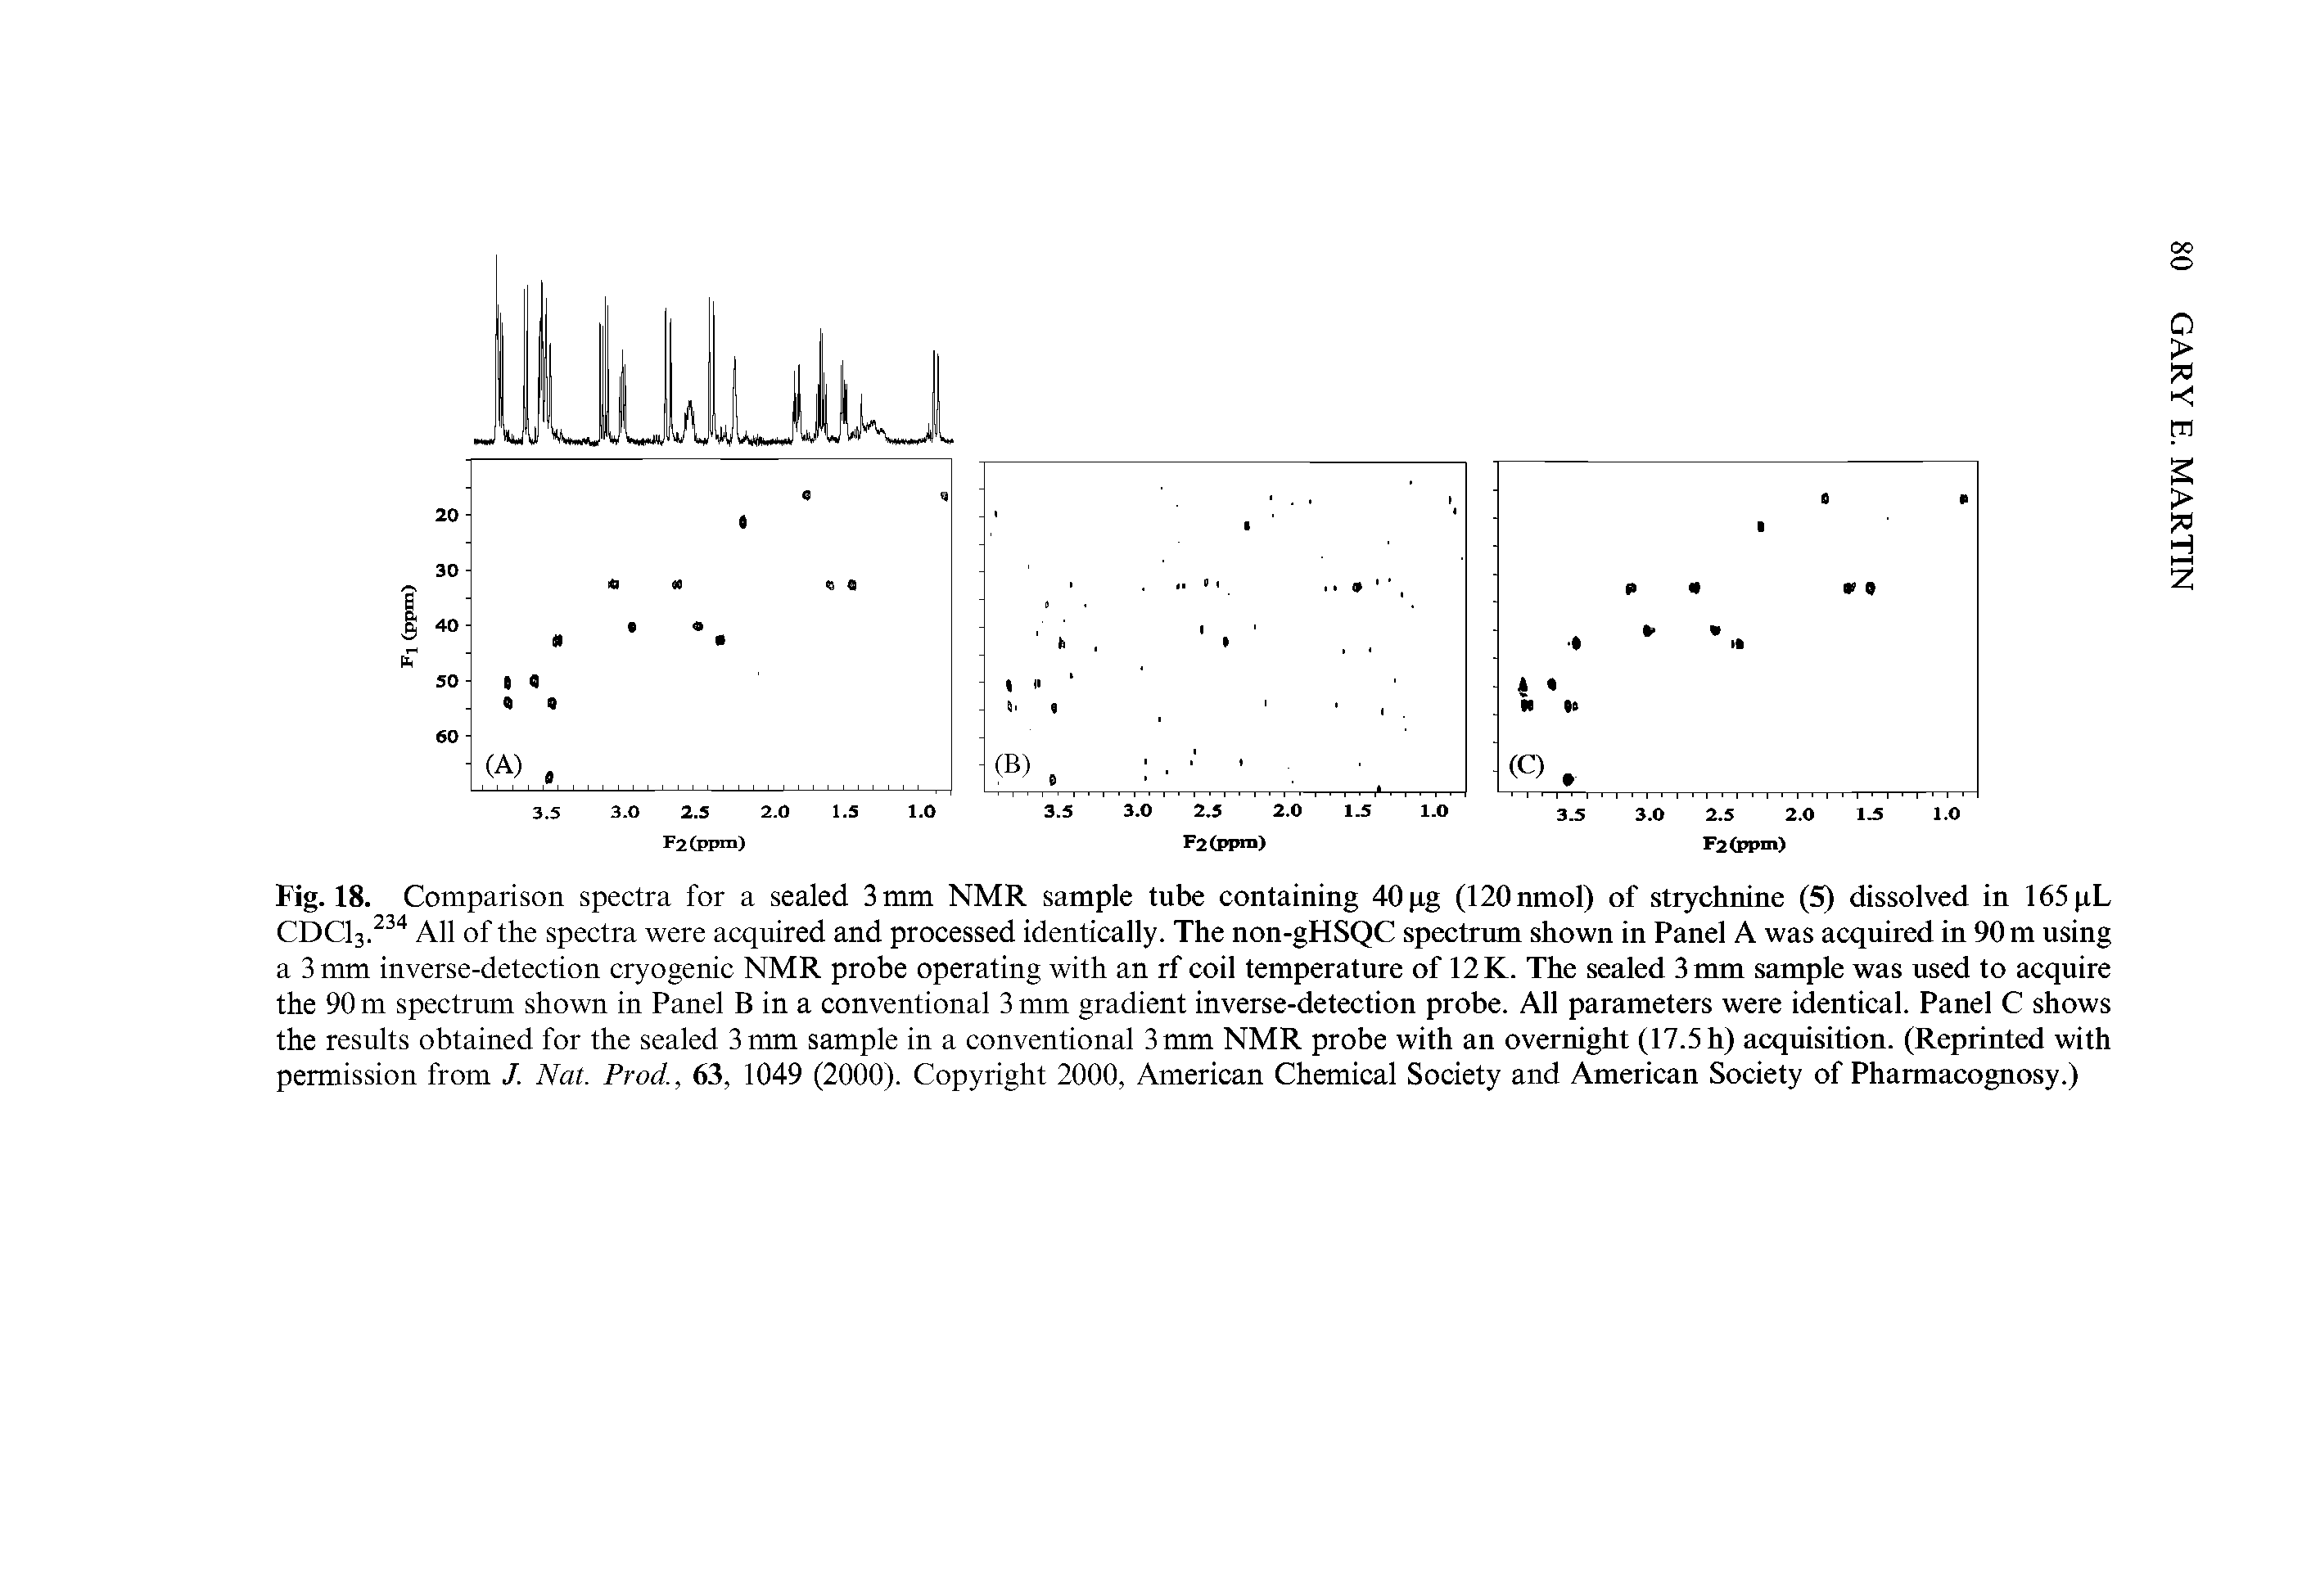 Fig. 18. Comparison spectra for a sealed 3 mm NMR sample tube containing 40 pg (120 nmol) of strychnine (5) dissolved in 165 pL CDC13.234 All of the spectra were acquired and processed identically. The non-gHSQC spectrum shown in Panel A was acquired in 90 m using a 3 mm inverse-detection cryogenic NMR probe operating with an rf coil temperature of 12 K. The sealed 3 mm sample was used to acquire the 90 m spectrum shown in Panel B in a conventional 3 mm gradient inverse-detection probe. All parameters were identical. Panel C shows the results obtained for the sealed 3 mm sample in a conventional 3 mm NMR probe with an overnight (17.5 h) acquisition. (Reprinted with permission from J. Nat. Prod., 63, 1049 (2000). Copyright 2000, American Chemical Society and American Society of Pharmacognosy.)...